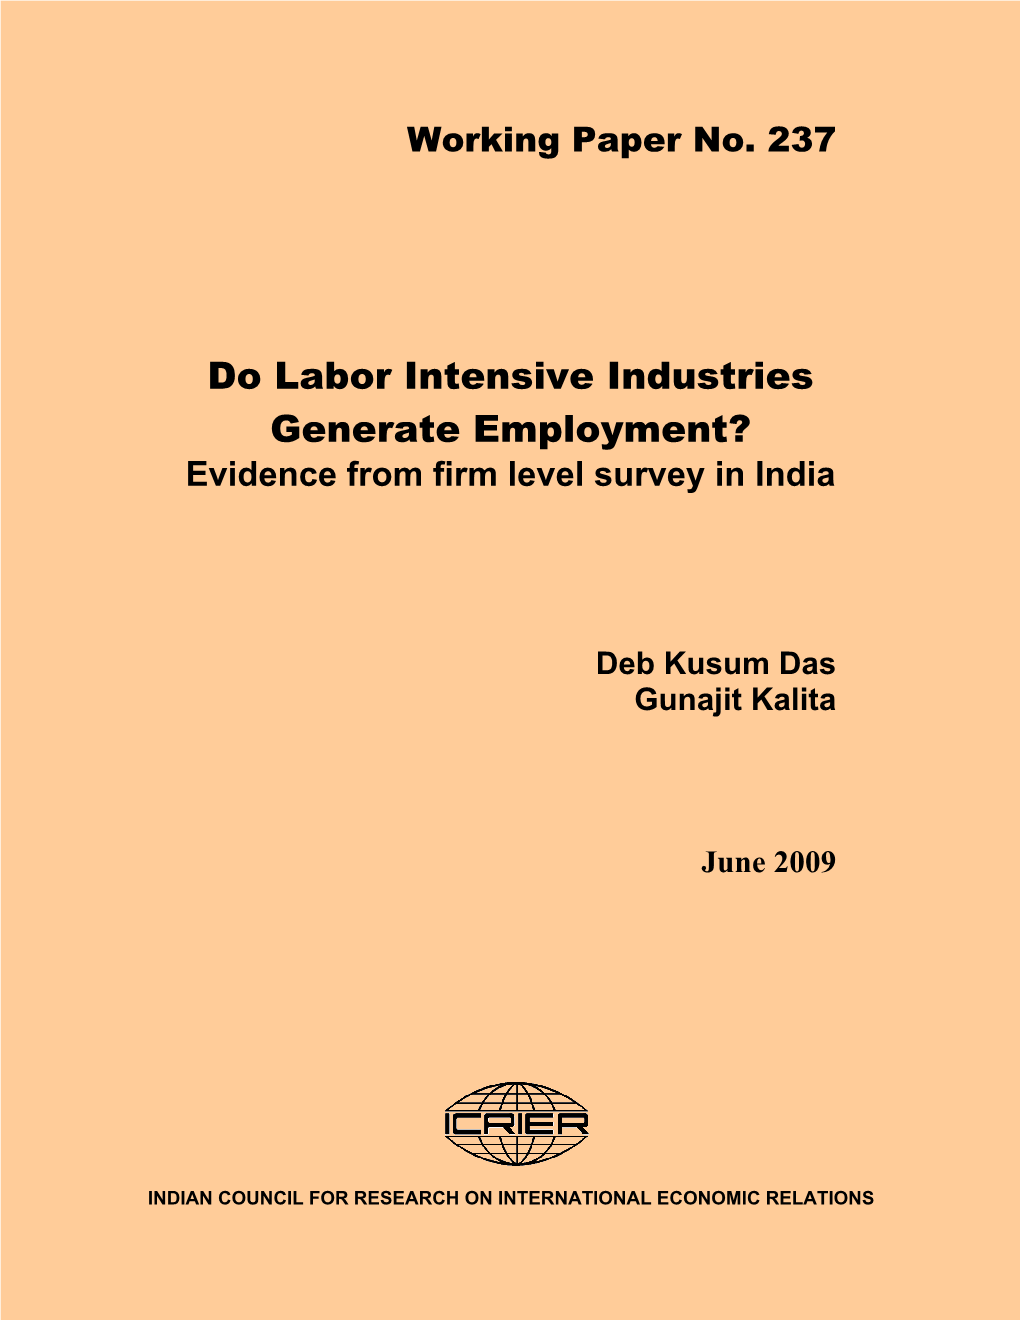 Do Labor Intensive Industries Generate Employment? Evidence from Firm Level Survey in India